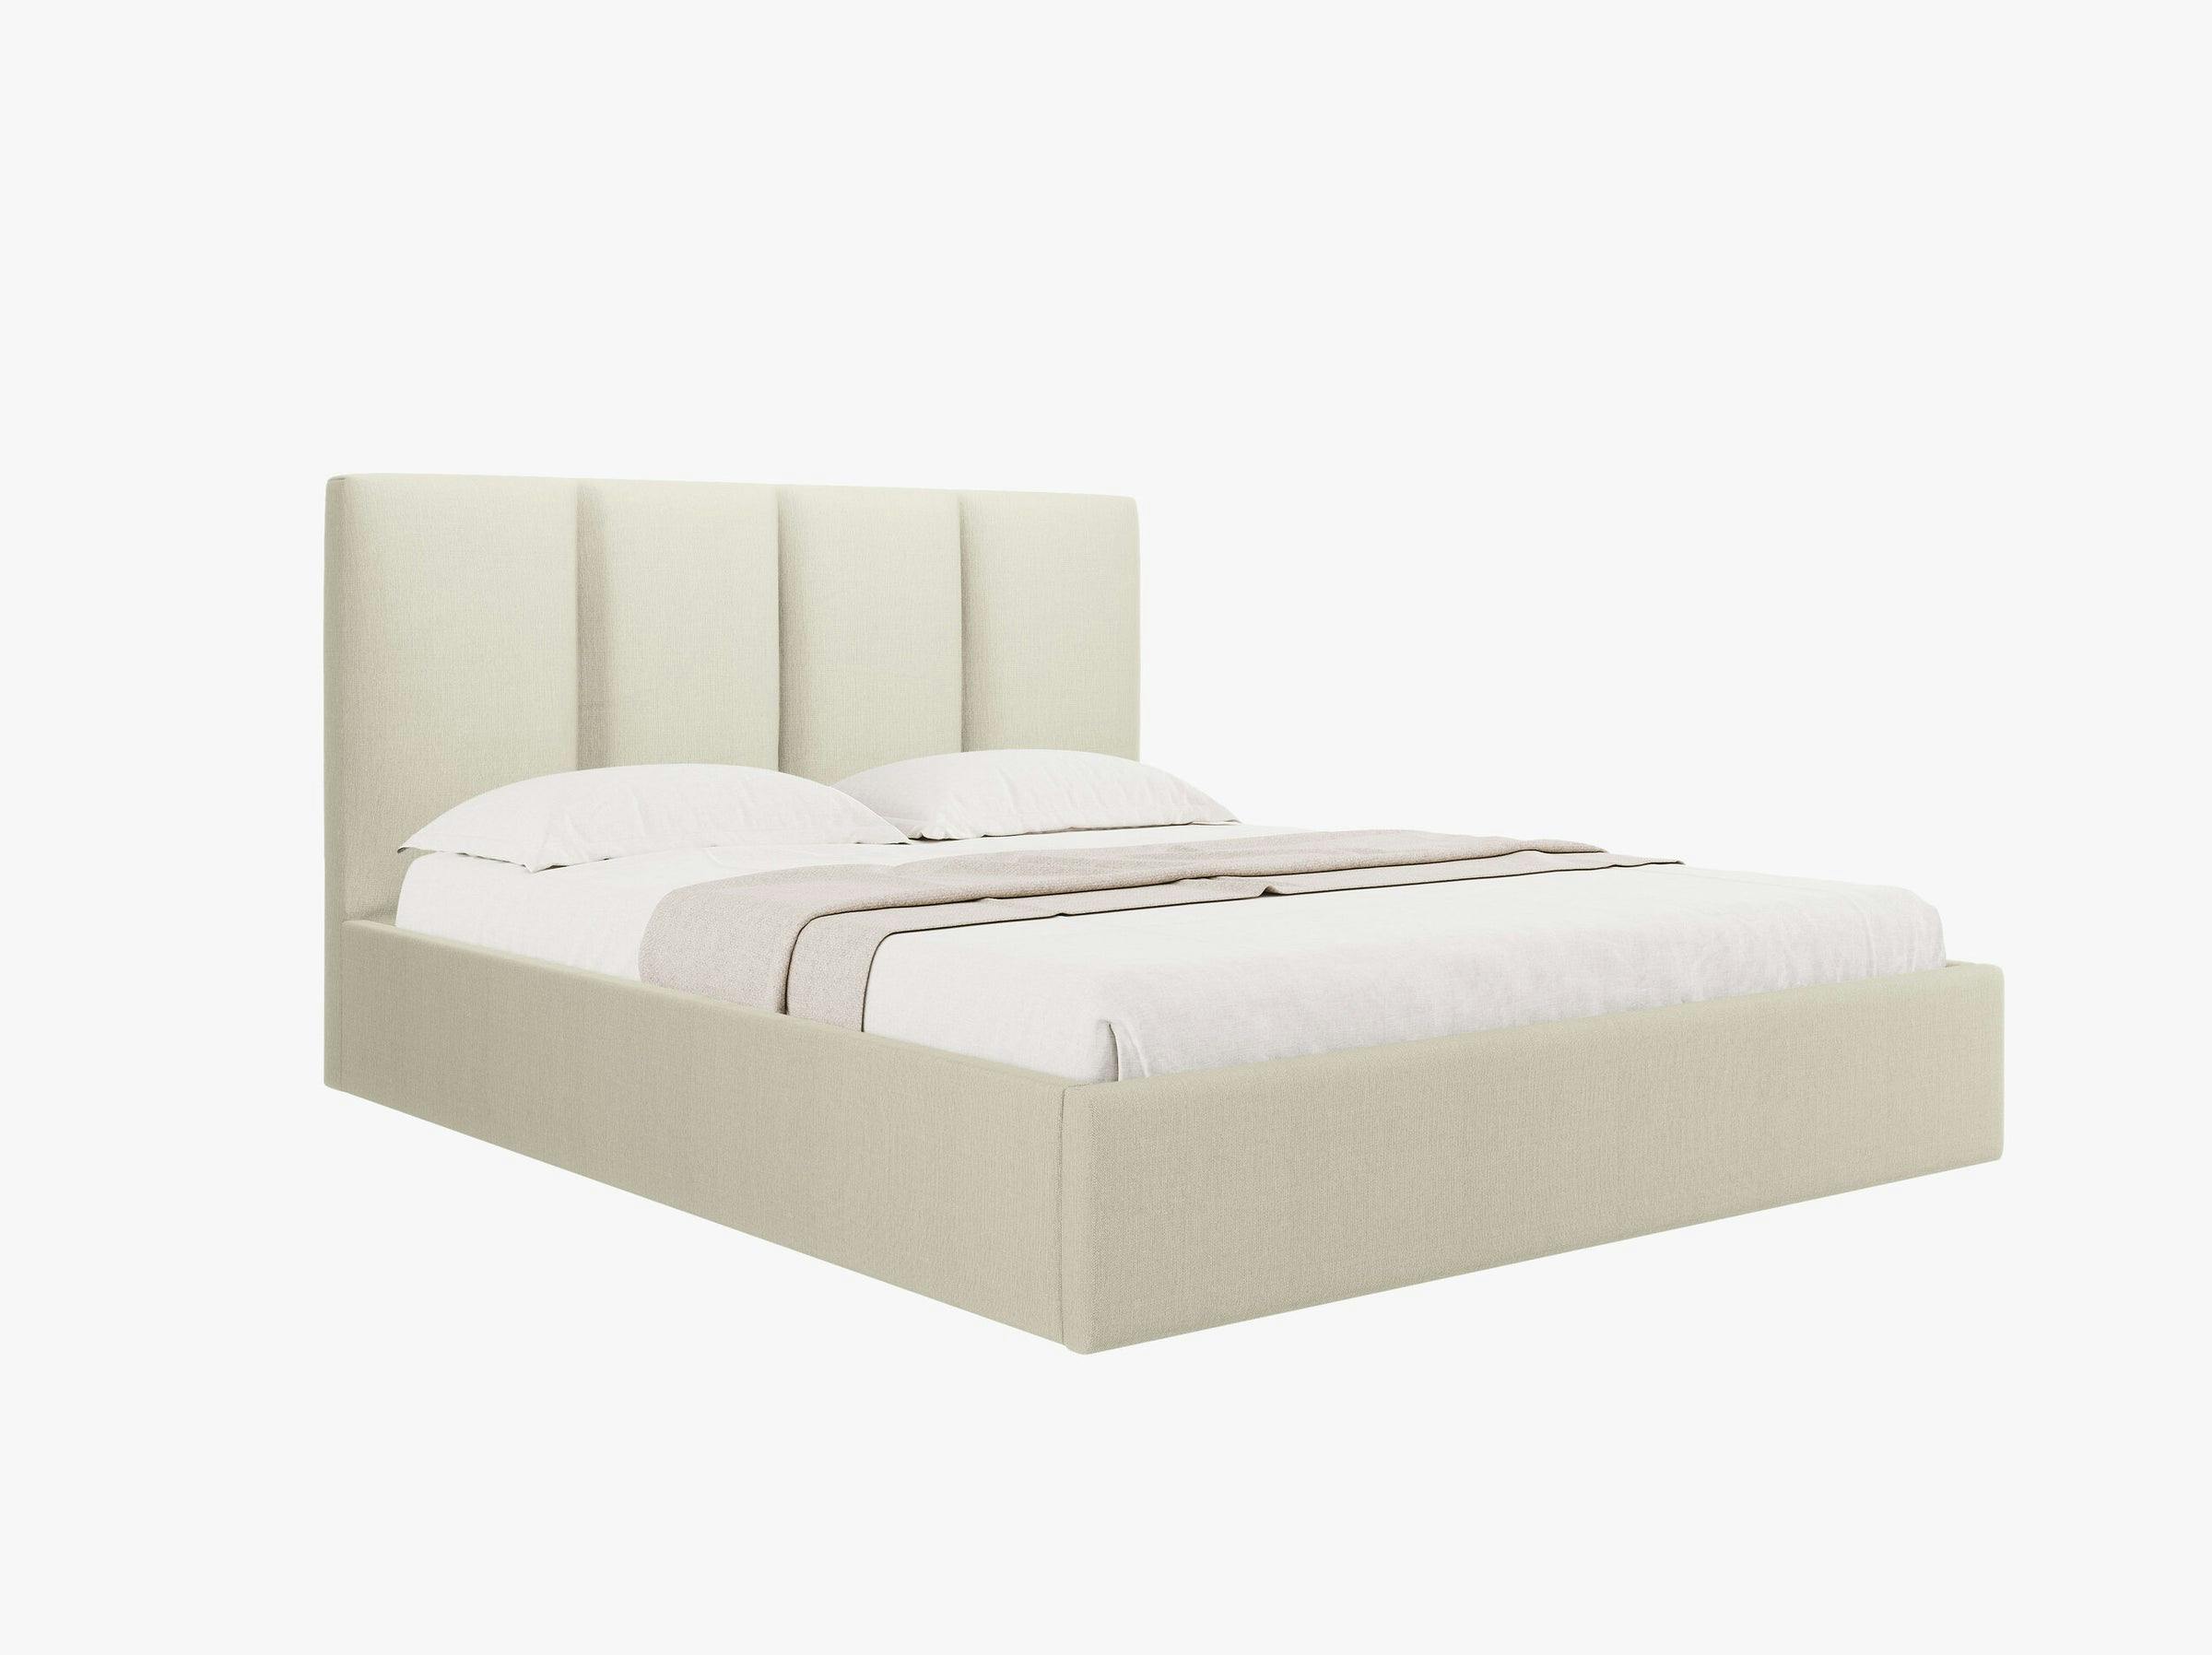 Pyla beds & mattresses structured fabric beige